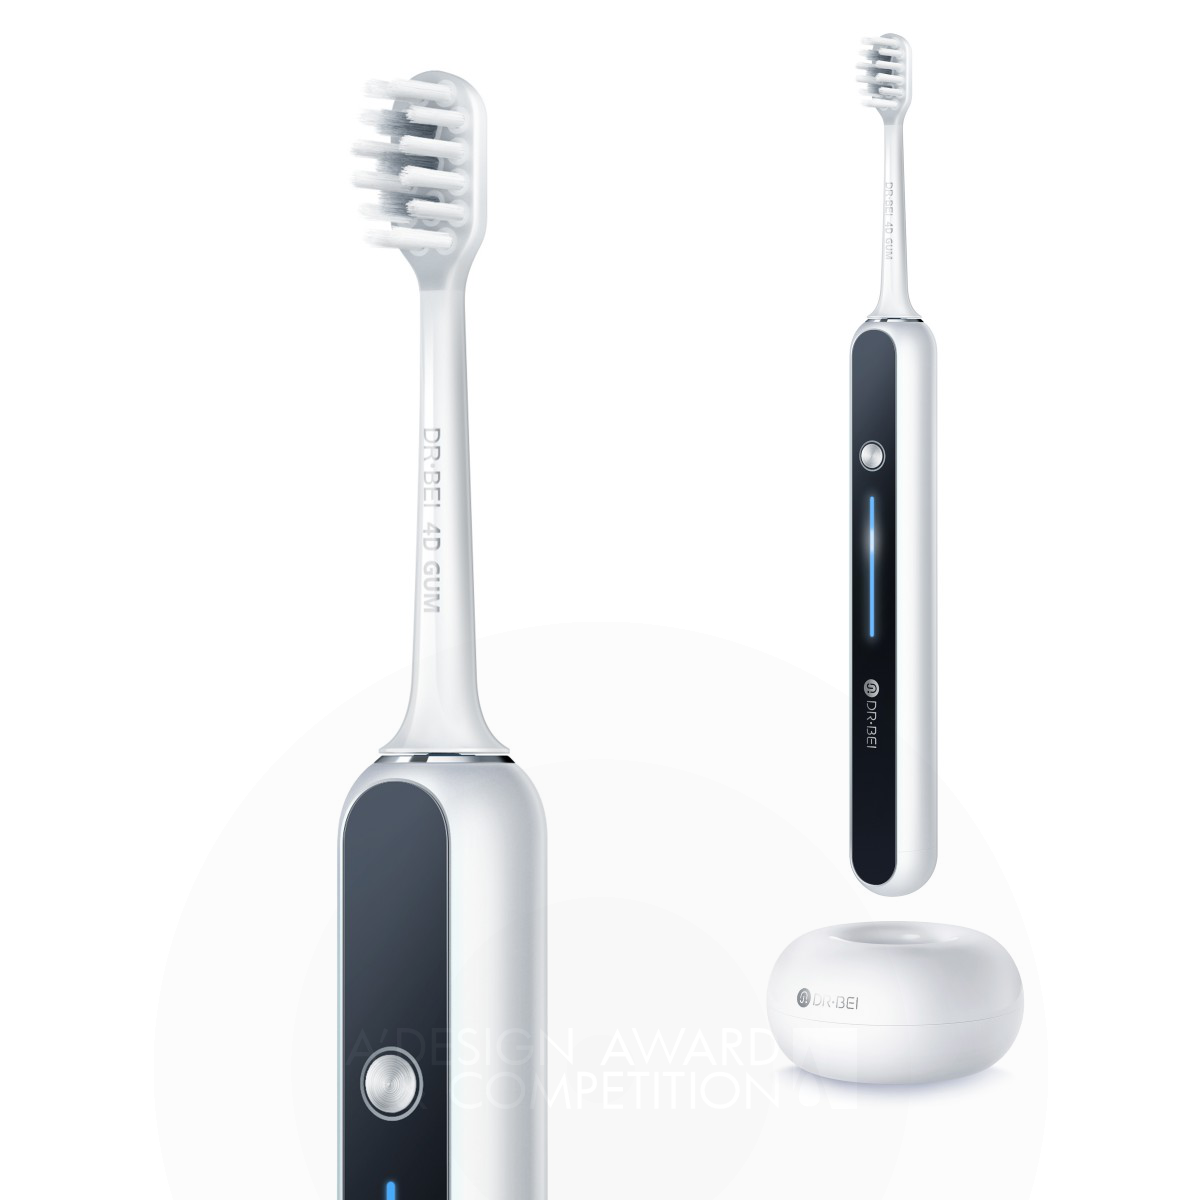 Revolutionizing Oral Care: Dr.Bei's S7 Sonic Electric Toothbrush